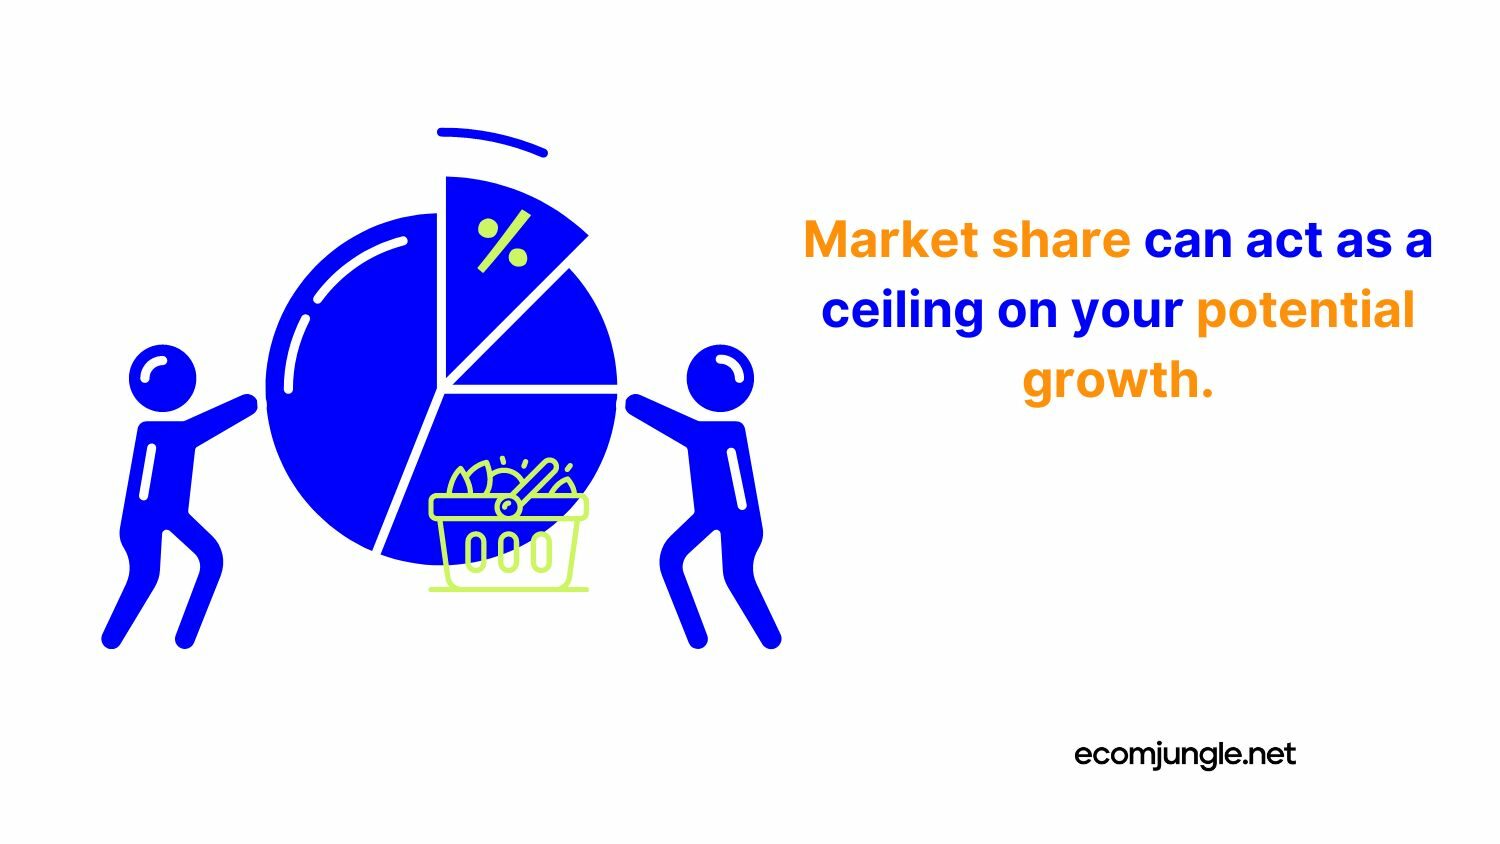 Splitting the market into small market shares is another disadvantage of competition.